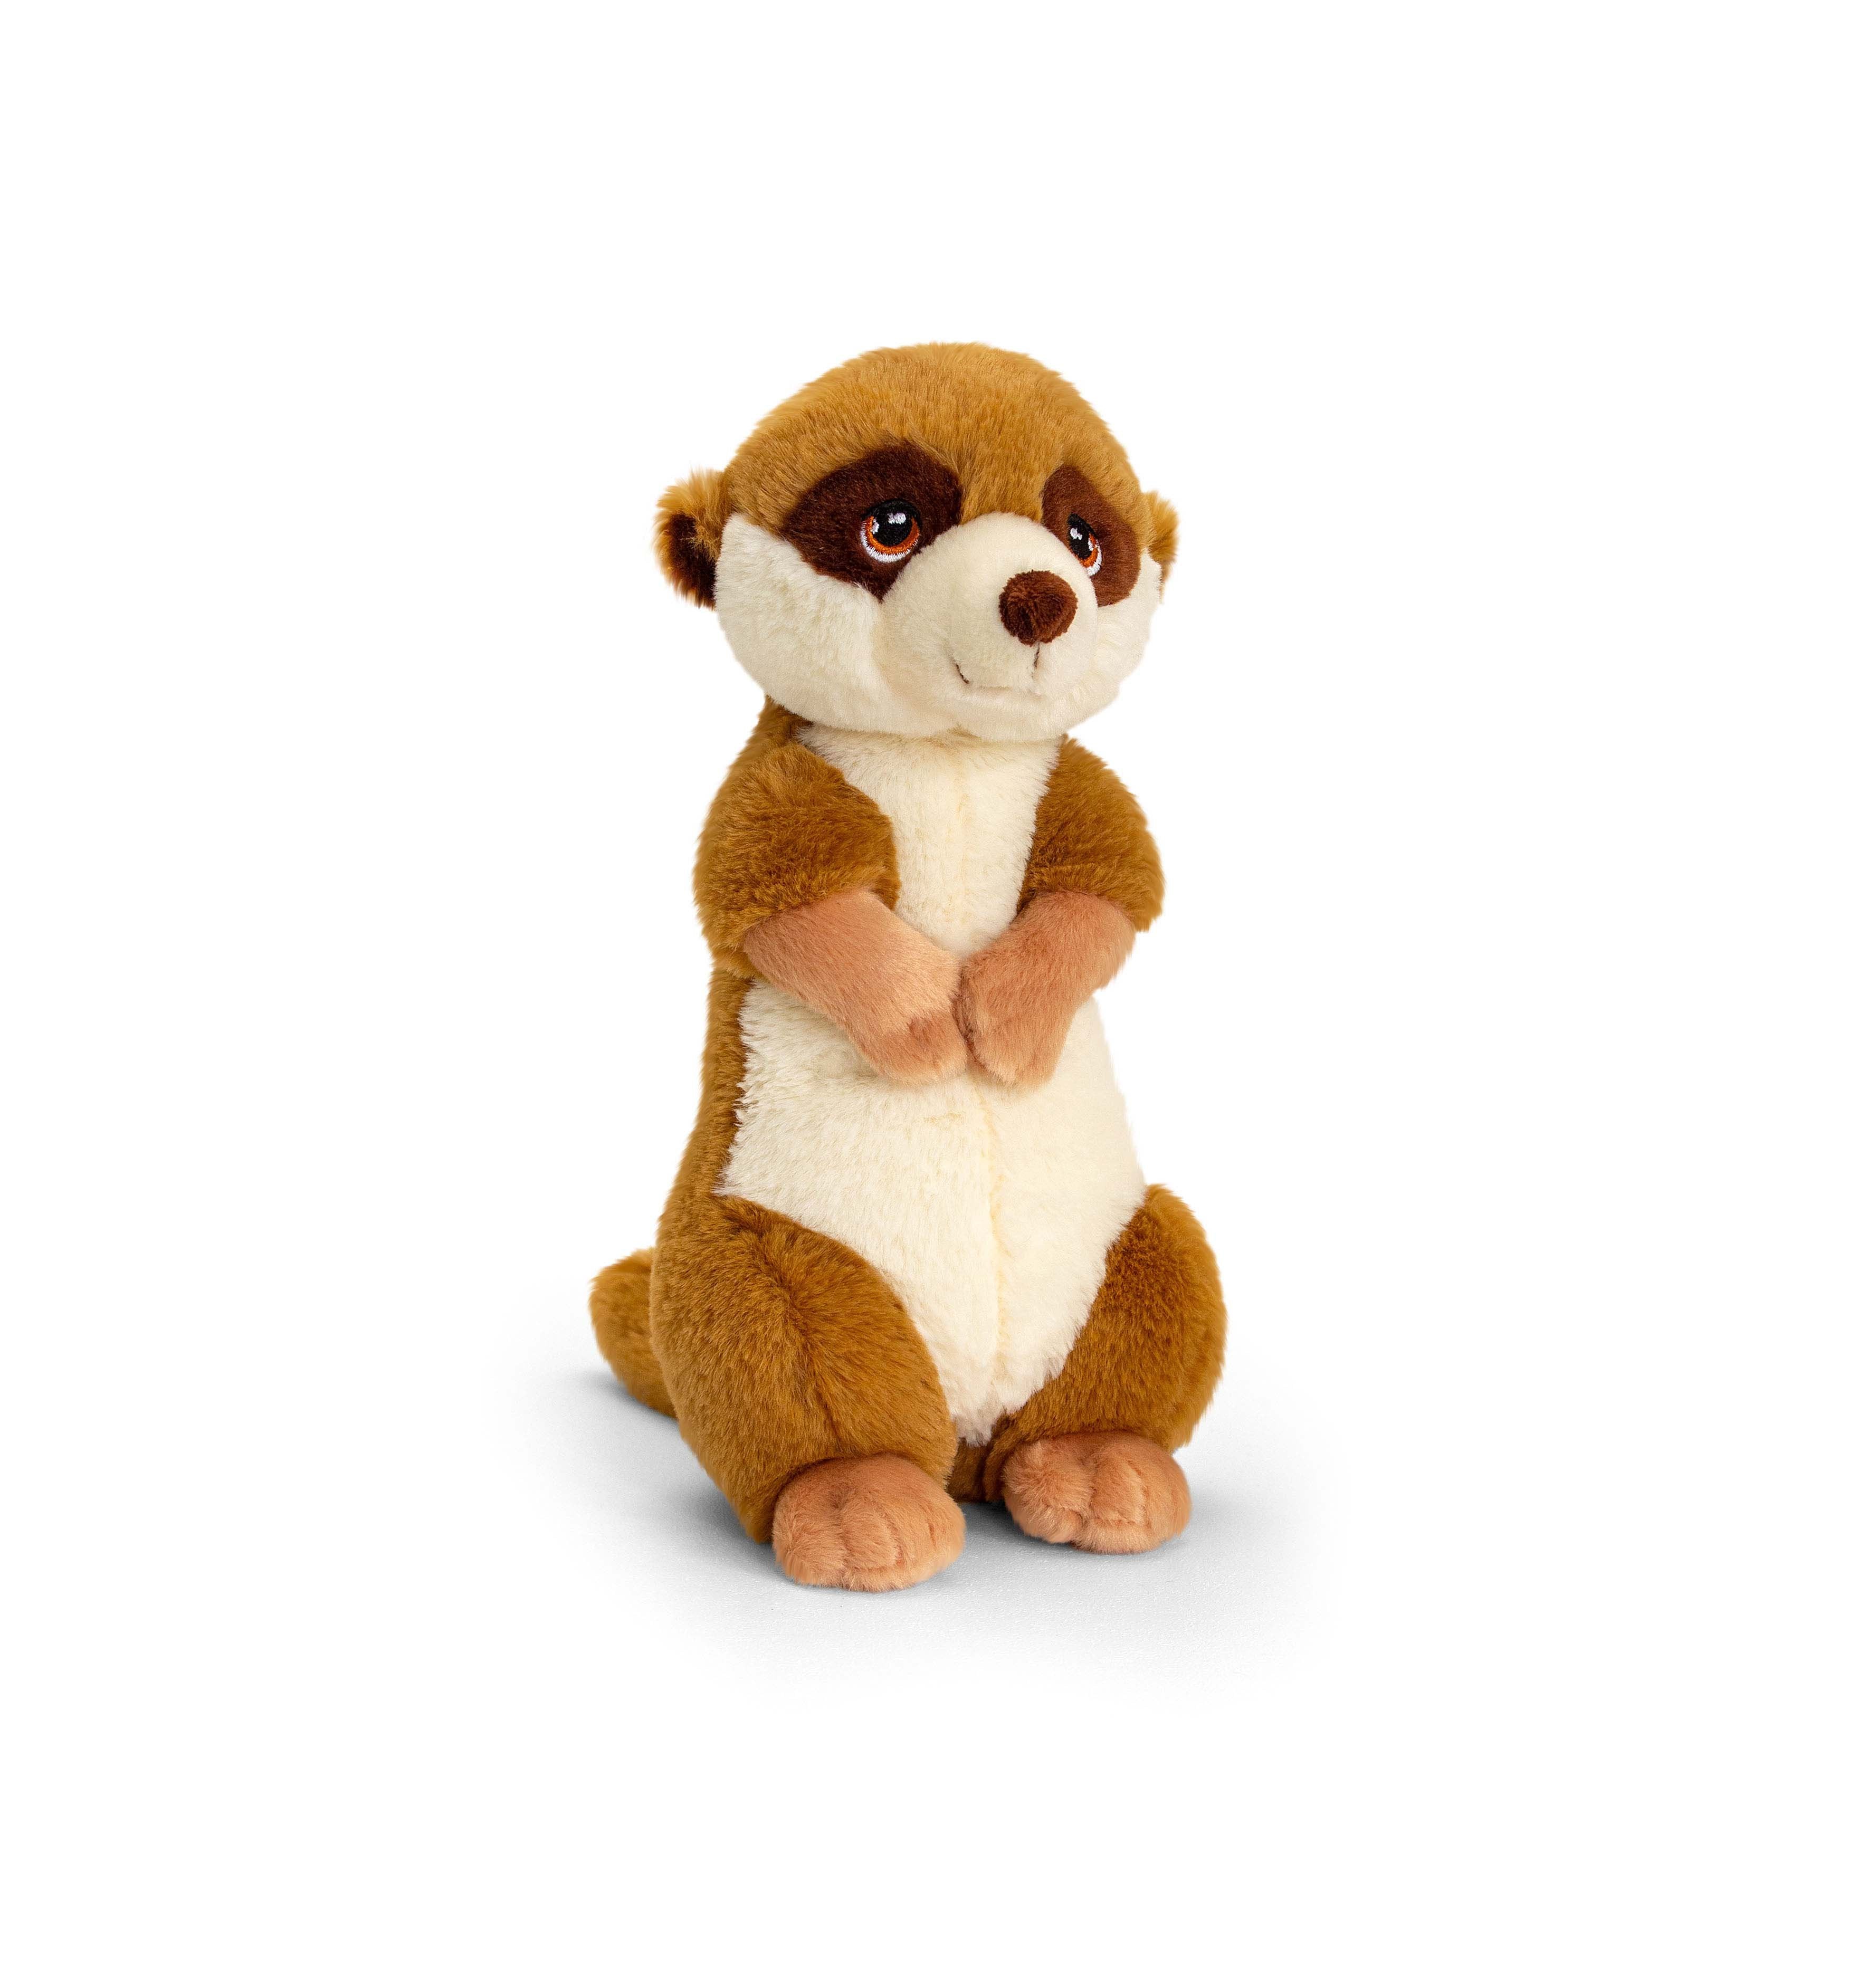 Soft toy animals | Realistic and cuddly soft toys | ZSL Shop